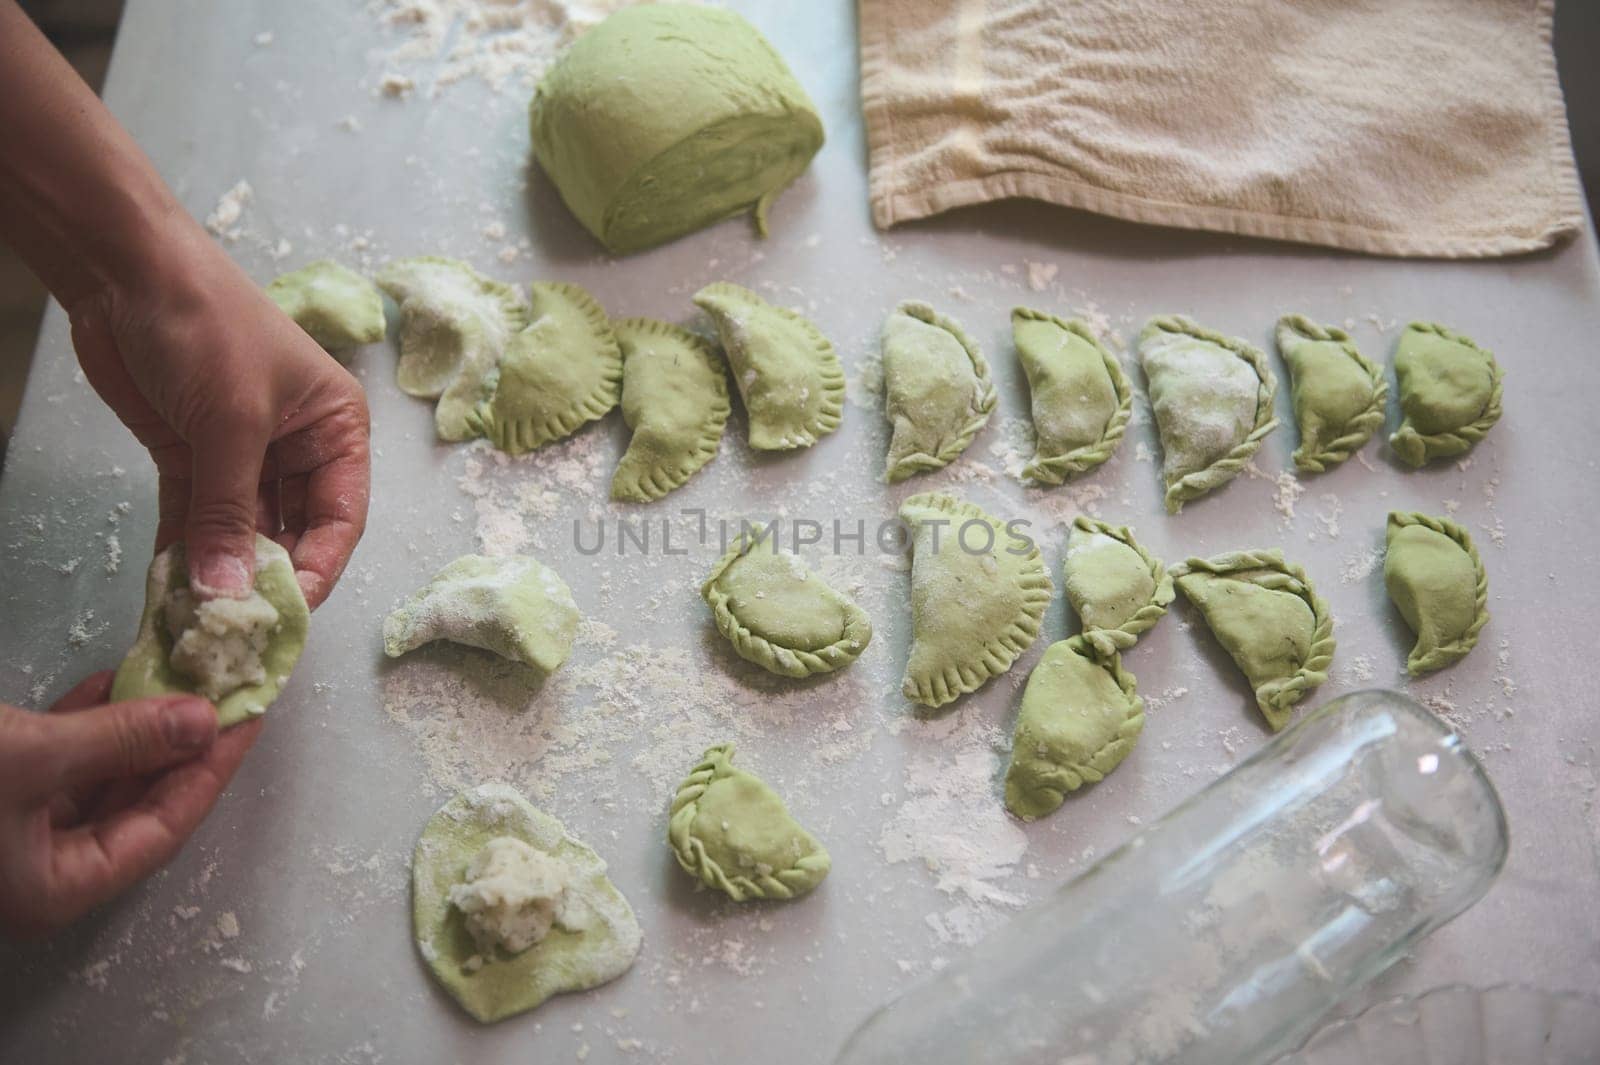 Details on the hands of a woman housewife, chef in beige apron making dumplings from green dough with melted spinach, and filling it with mashed potatoes, standing at kitchen table in rural house